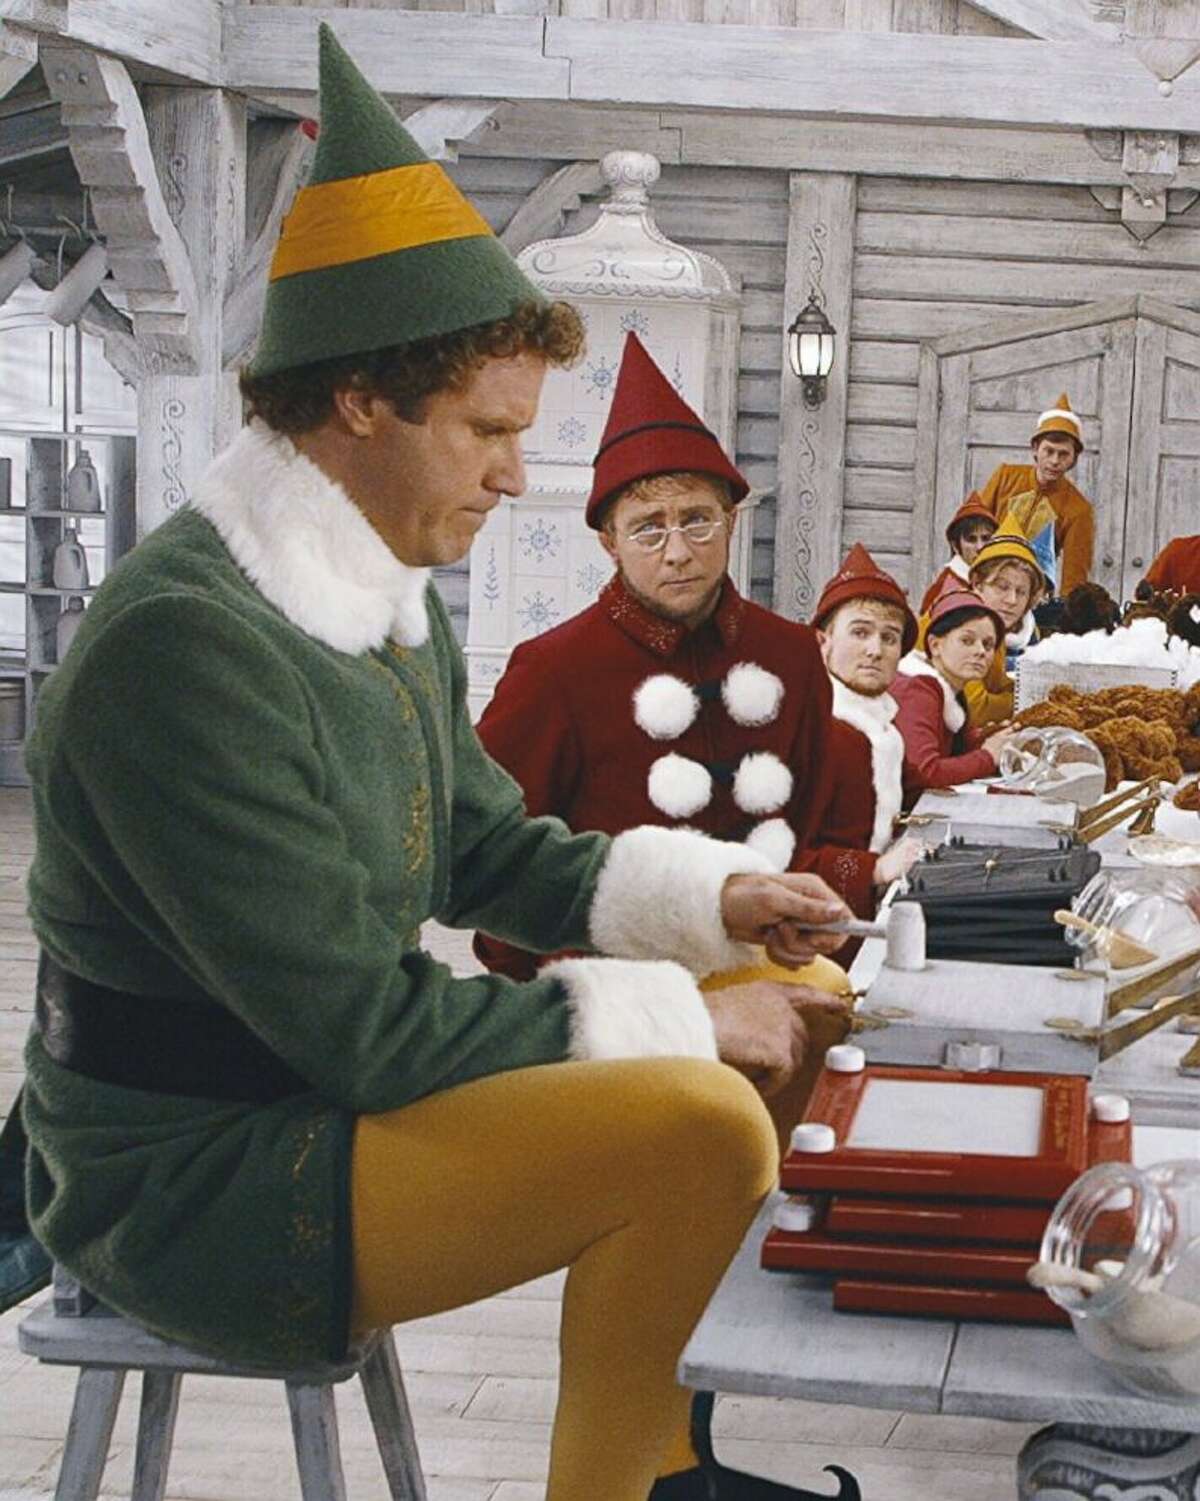 "I'm a cotton-headed ninny muggins!" "I just like to smile. Smiling's my favorite." "Son of a nutcracker!" "We elves try to stick to the four main food groups: candy, candy canes, candy corns and syrup." "I know him! I know him!" Just some of the many, many famous quotes from 2003's instant classic, "Elf."